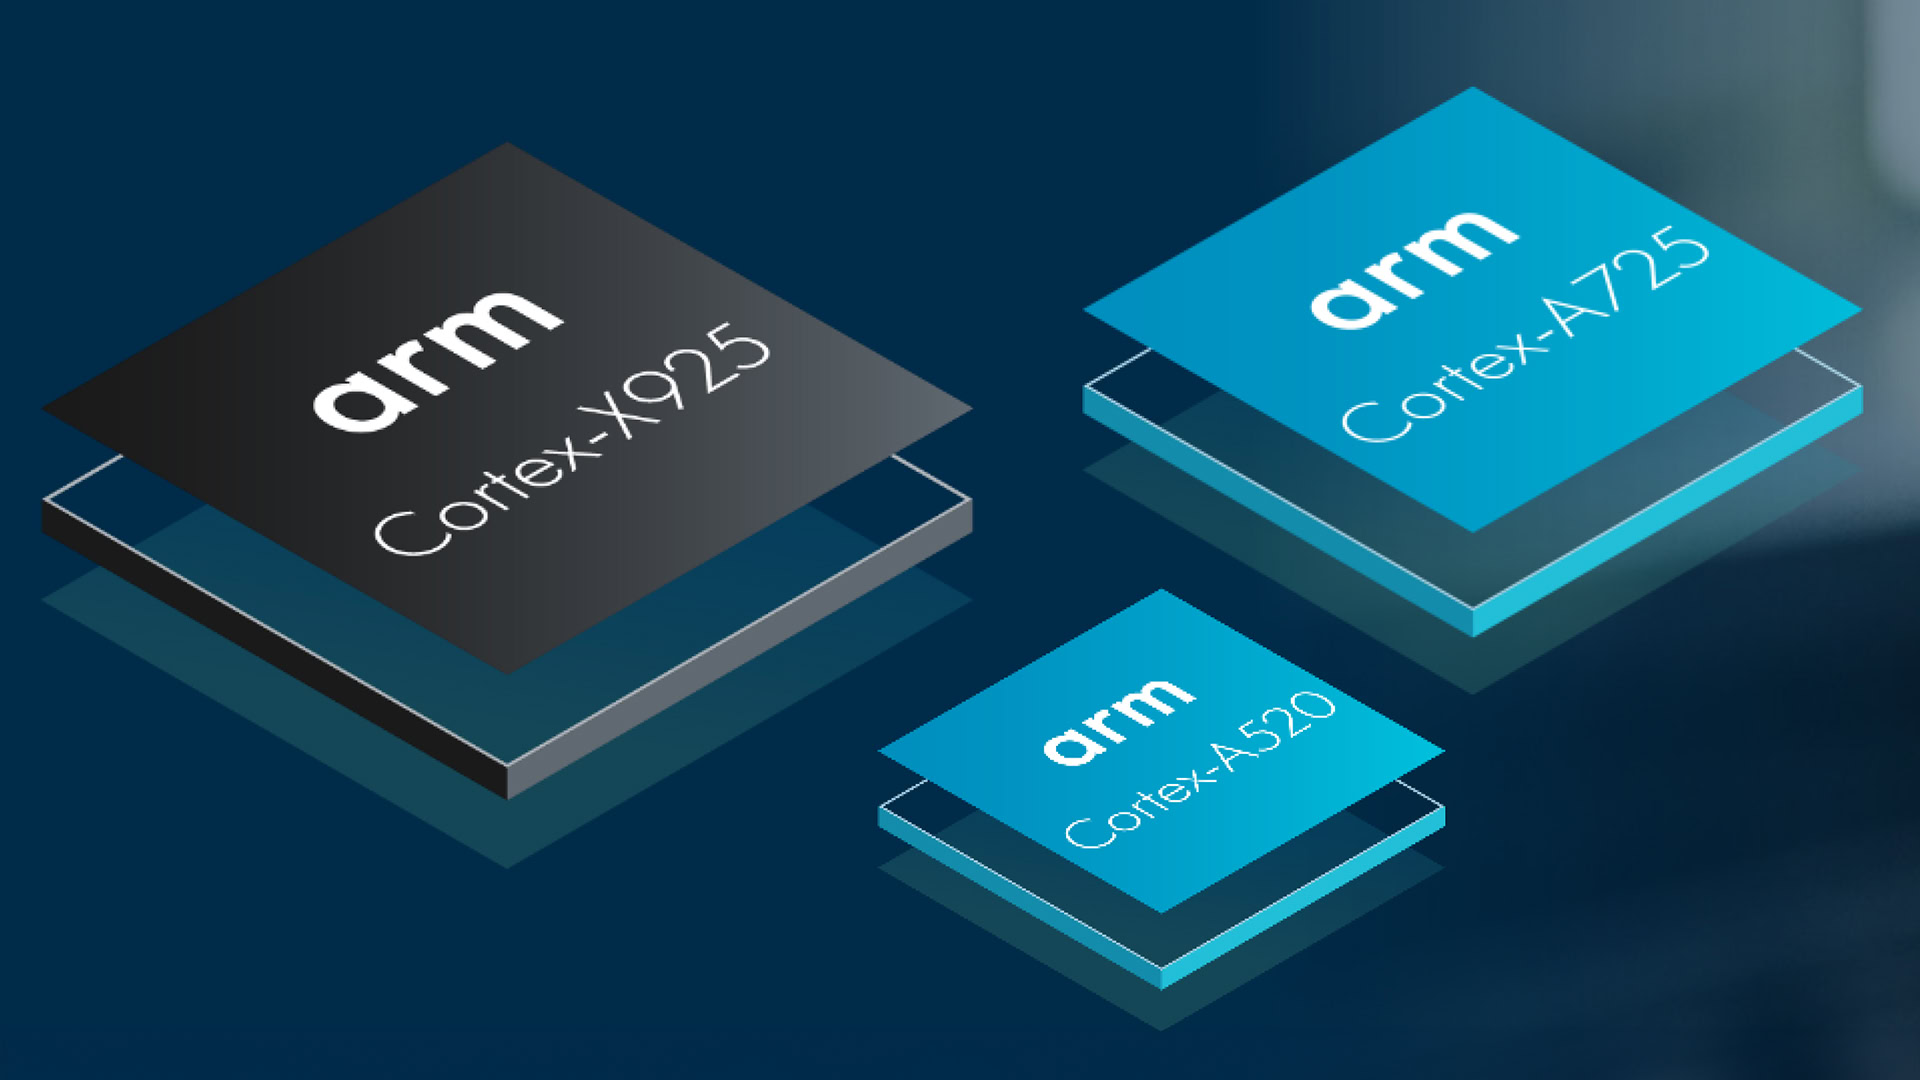 Deep dive into Arm’s new Cortex-X925 and Immortalis-G925 for mobile